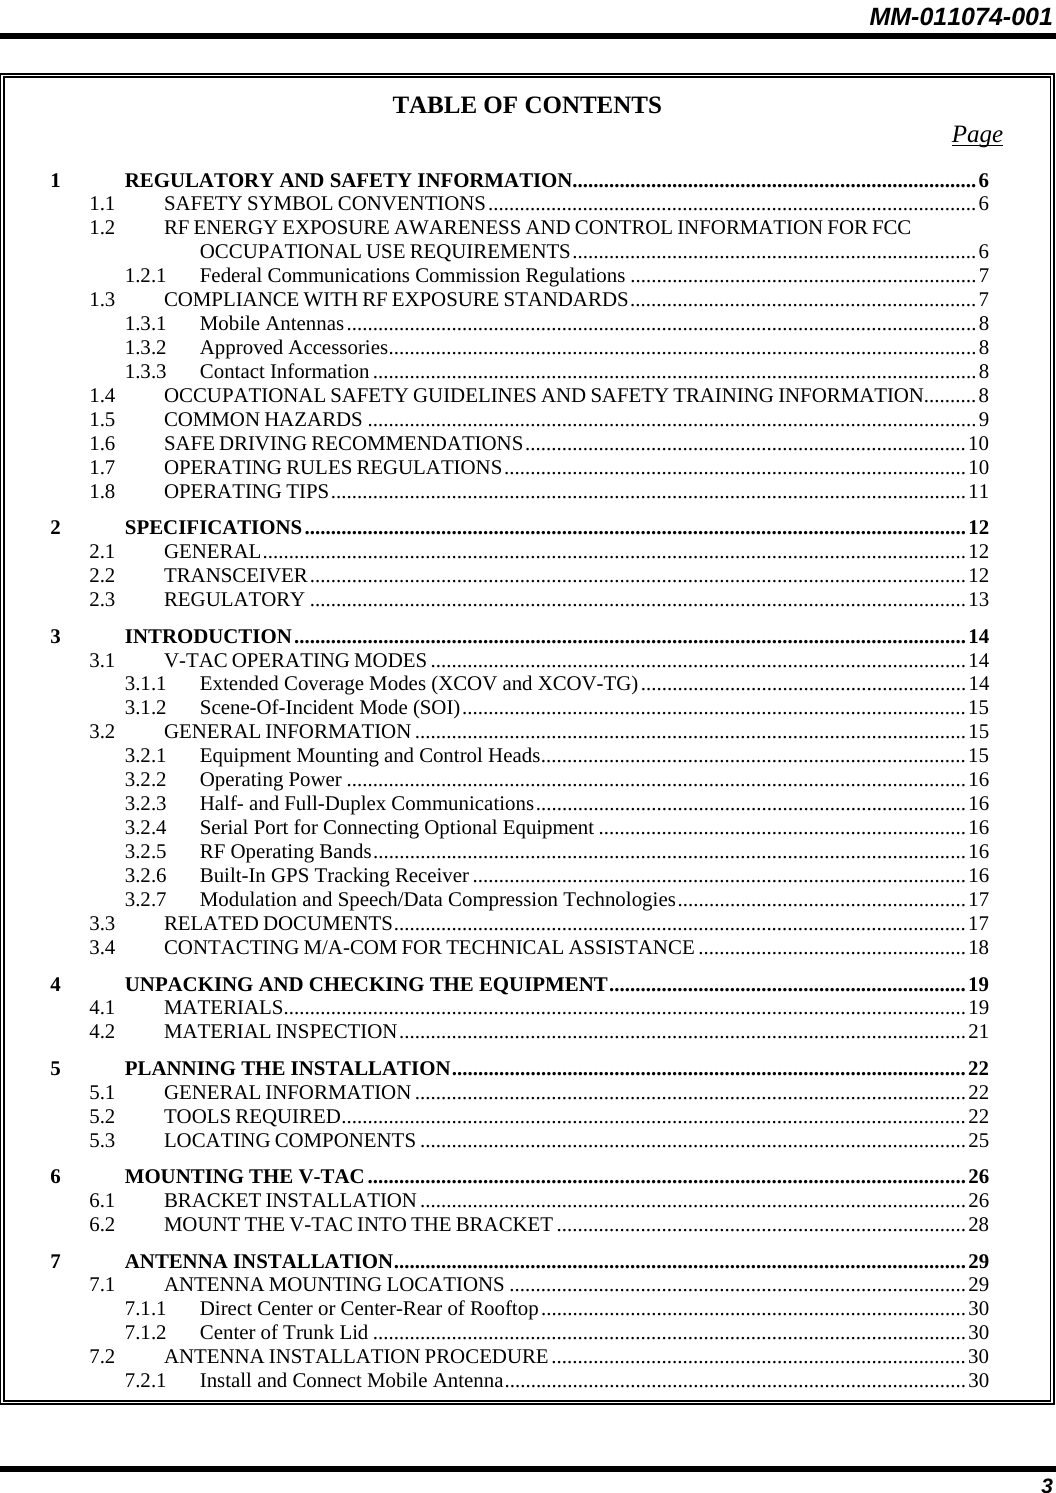 MM-011074-001 3 TABLE OF CONTENTS  Page 1 REGULATORY AND SAFETY INFORMATION.............................................................................6 1.1 SAFETY SYMBOL CONVENTIONS.............................................................................................6 1.2 RF ENERGY EXPOSURE AWARENESS AND CONTROL INFORMATION FOR FCC OCCUPATIONAL USE REQUIREMENTS.............................................................................6 1.2.1 Federal Communications Commission Regulations ..................................................................7 1.3 COMPLIANCE WITH RF EXPOSURE STANDARDS..................................................................7 1.3.1 Mobile Antennas........................................................................................................................8 1.3.2 Approved Accessories................................................................................................................8 1.3.3 Contact Information...................................................................................................................8 1.4 OCCUPATIONAL SAFETY GUIDELINES AND SAFETY TRAINING INFORMATION..........8 1.5 COMMON HAZARDS ....................................................................................................................9 1.6 SAFE DRIVING RECOMMENDATIONS....................................................................................10 1.7 OPERATING RULES REGULATIONS........................................................................................10 1.8 OPERATING TIPS.........................................................................................................................11 2 SPECIFICATIONS..............................................................................................................................12 2.1 GENERAL......................................................................................................................................12 2.2 TRANSCEIVER.............................................................................................................................12 2.3 REGULATORY .............................................................................................................................13 3 INTRODUCTION................................................................................................................................14 3.1 V-TAC OPERATING MODES ......................................................................................................14 3.1.1 Extended Coverage Modes (XCOV and XCOV-TG)..............................................................14 3.1.2 Scene-Of-Incident Mode (SOI)................................................................................................15 3.2 GENERAL INFORMATION .........................................................................................................15 3.2.1 Equipment Mounting and Control Heads.................................................................................15 3.2.2 Operating Power ......................................................................................................................16 3.2.3 Half- and Full-Duplex Communications..................................................................................16 3.2.4 Serial Port for Connecting Optional Equipment ......................................................................16 3.2.5 RF Operating Bands.................................................................................................................16 3.2.6 Built-In GPS Tracking Receiver ..............................................................................................16 3.2.7 Modulation and Speech/Data Compression Technologies.......................................................17 3.3 RELATED DOCUMENTS.............................................................................................................17 3.4 CONTACTING M/A-COM FOR TECHNICAL ASSISTANCE ...................................................18 4 UNPACKING AND CHECKING THE EQUIPMENT....................................................................19 4.1 MATERIALS..................................................................................................................................19 4.2 MATERIAL INSPECTION............................................................................................................21 5 PLANNING THE INSTALLATION..................................................................................................22 5.1 GENERAL INFORMATION .........................................................................................................22 5.2 TOOLS REQUIRED.......................................................................................................................22 5.3 LOCATING COMPONENTS ........................................................................................................25 6 MOUNTING THE V-TAC..................................................................................................................26 6.1 BRACKET INSTALLATION........................................................................................................26 6.2 MOUNT THE V-TAC INTO THE BRACKET ..............................................................................28 7 ANTENNA INSTALLATION.............................................................................................................29 7.1 ANTENNA MOUNTING LOCATIONS .......................................................................................29 7.1.1 Direct Center or Center-Rear of Rooftop.................................................................................30 7.1.2 Center of Trunk Lid .................................................................................................................30 7.2 ANTENNA INSTALLATION PROCEDURE...............................................................................30 7.2.1 Install and Connect Mobile Antenna........................................................................................30 